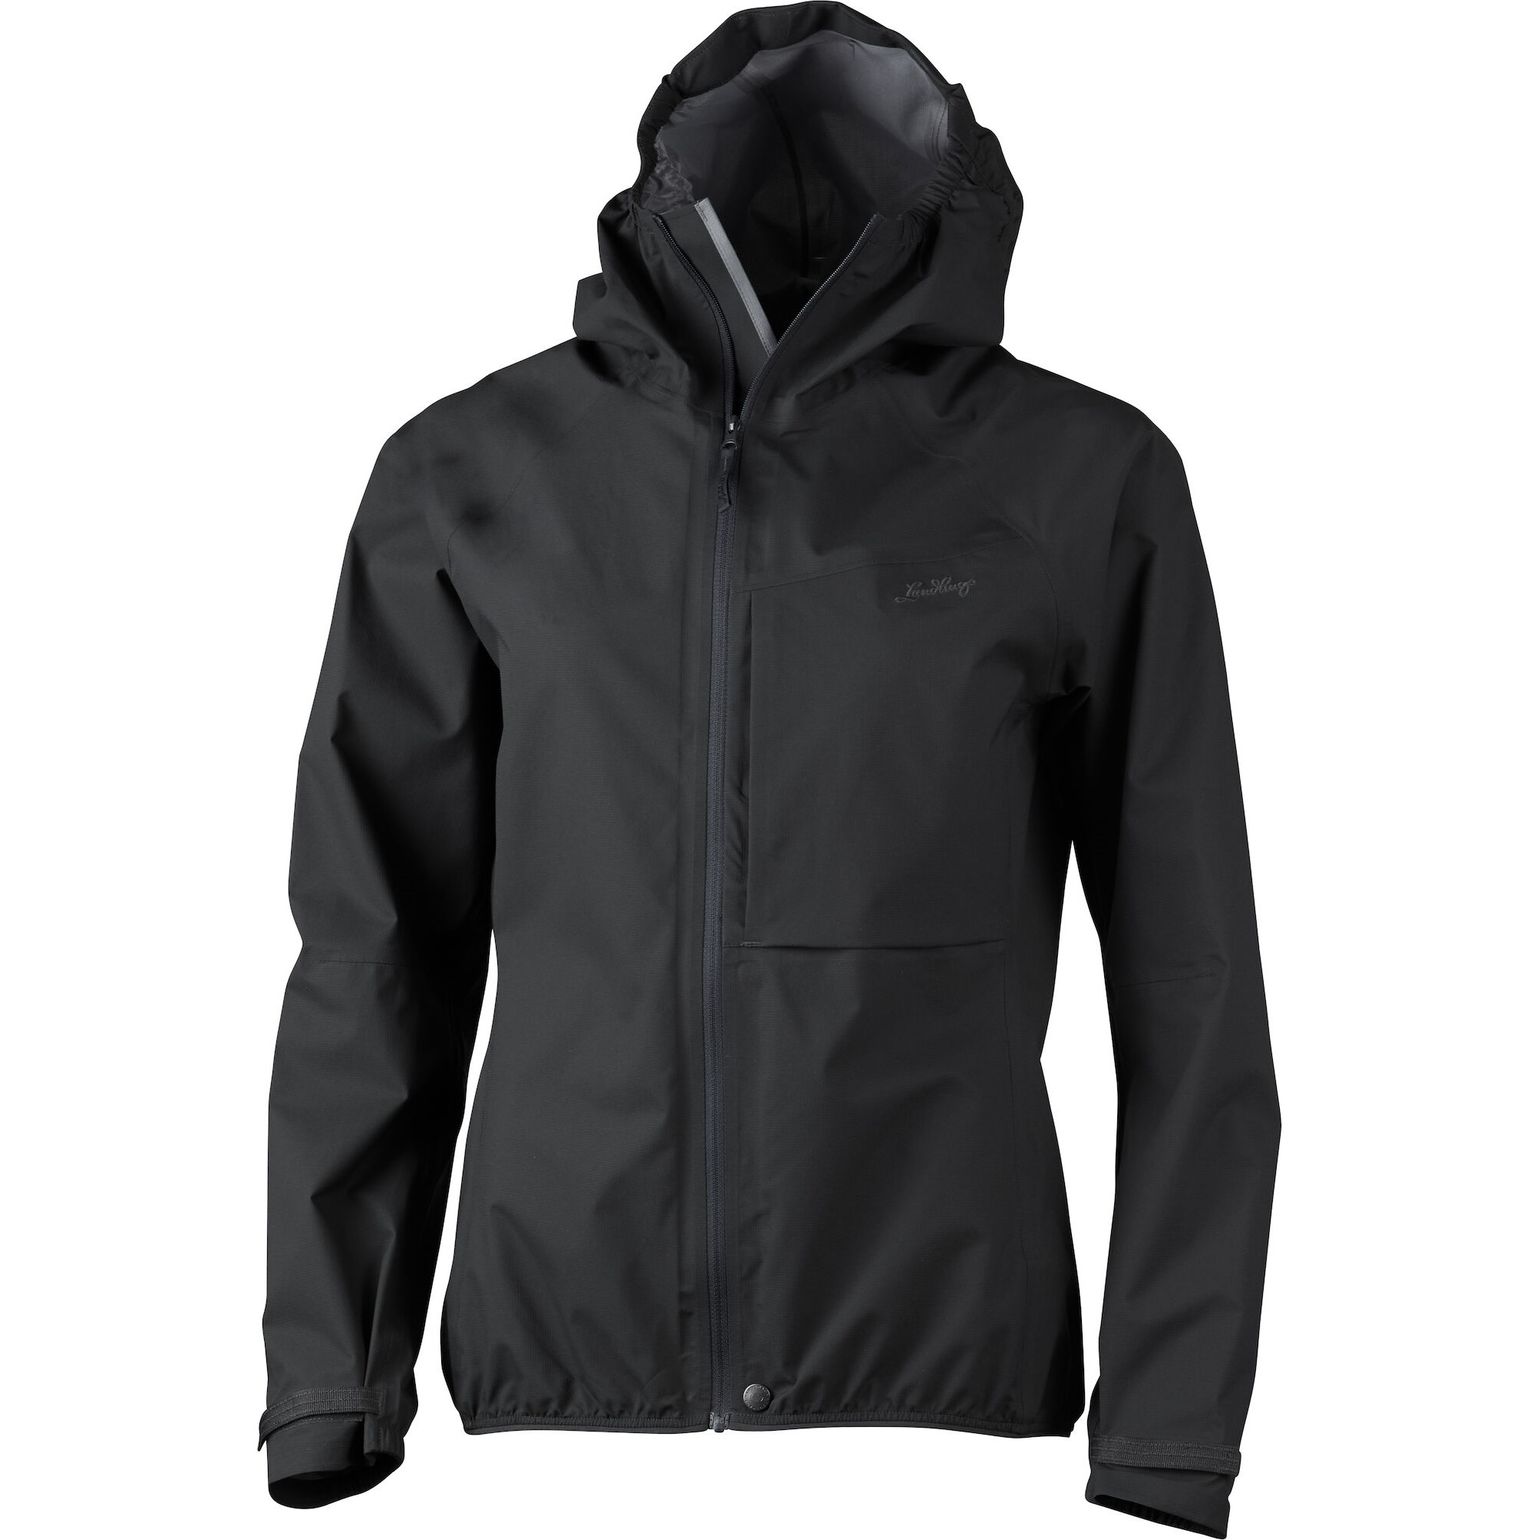 Lundhags Women's Lo Jacket Charcoal